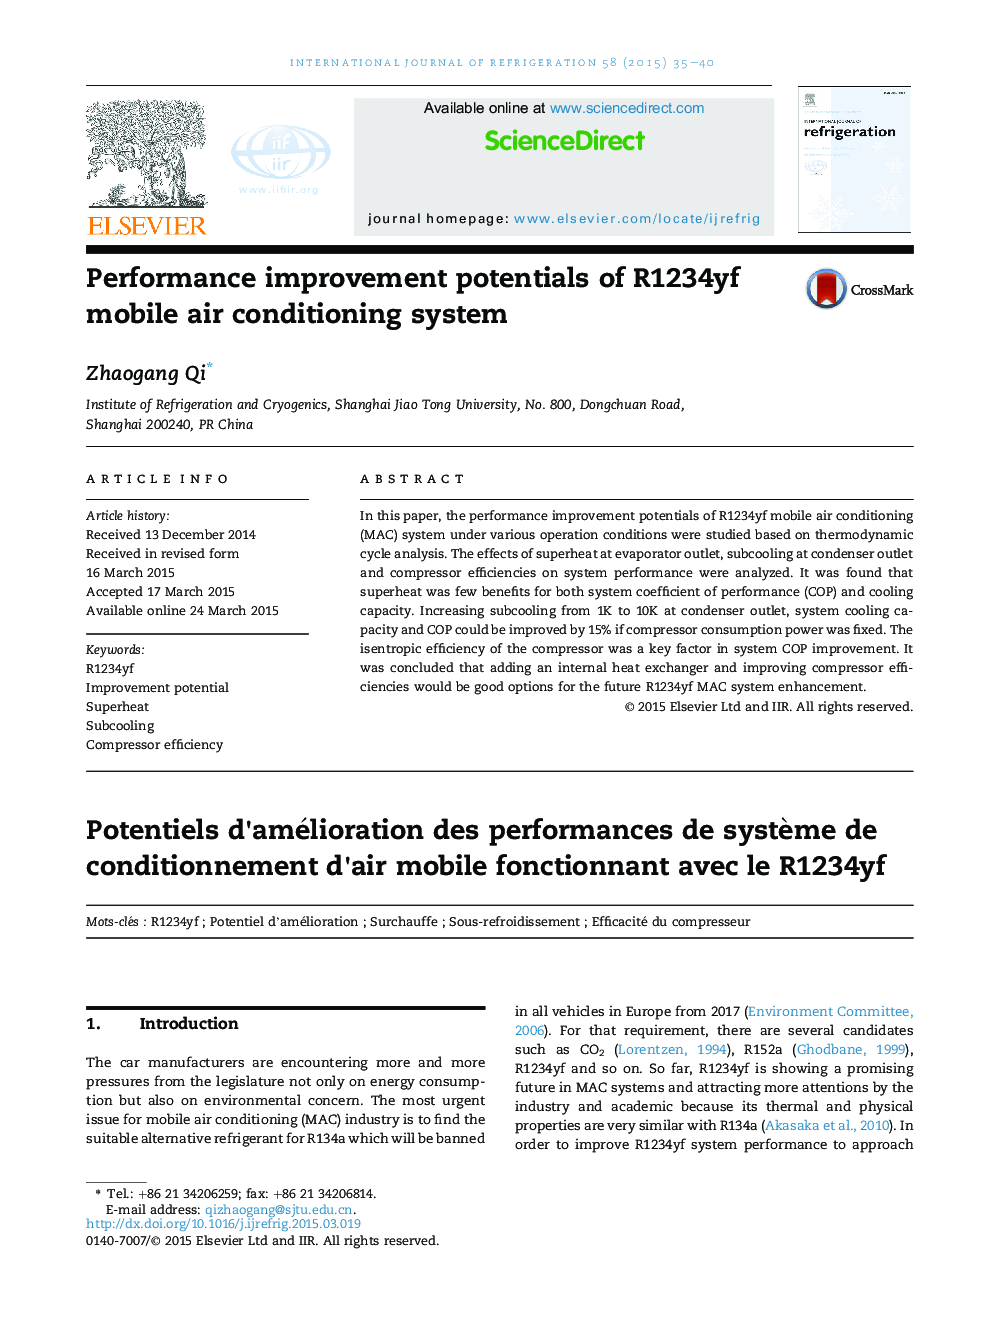 Performance improvement potentials of R1234yf mobile air conditioning system